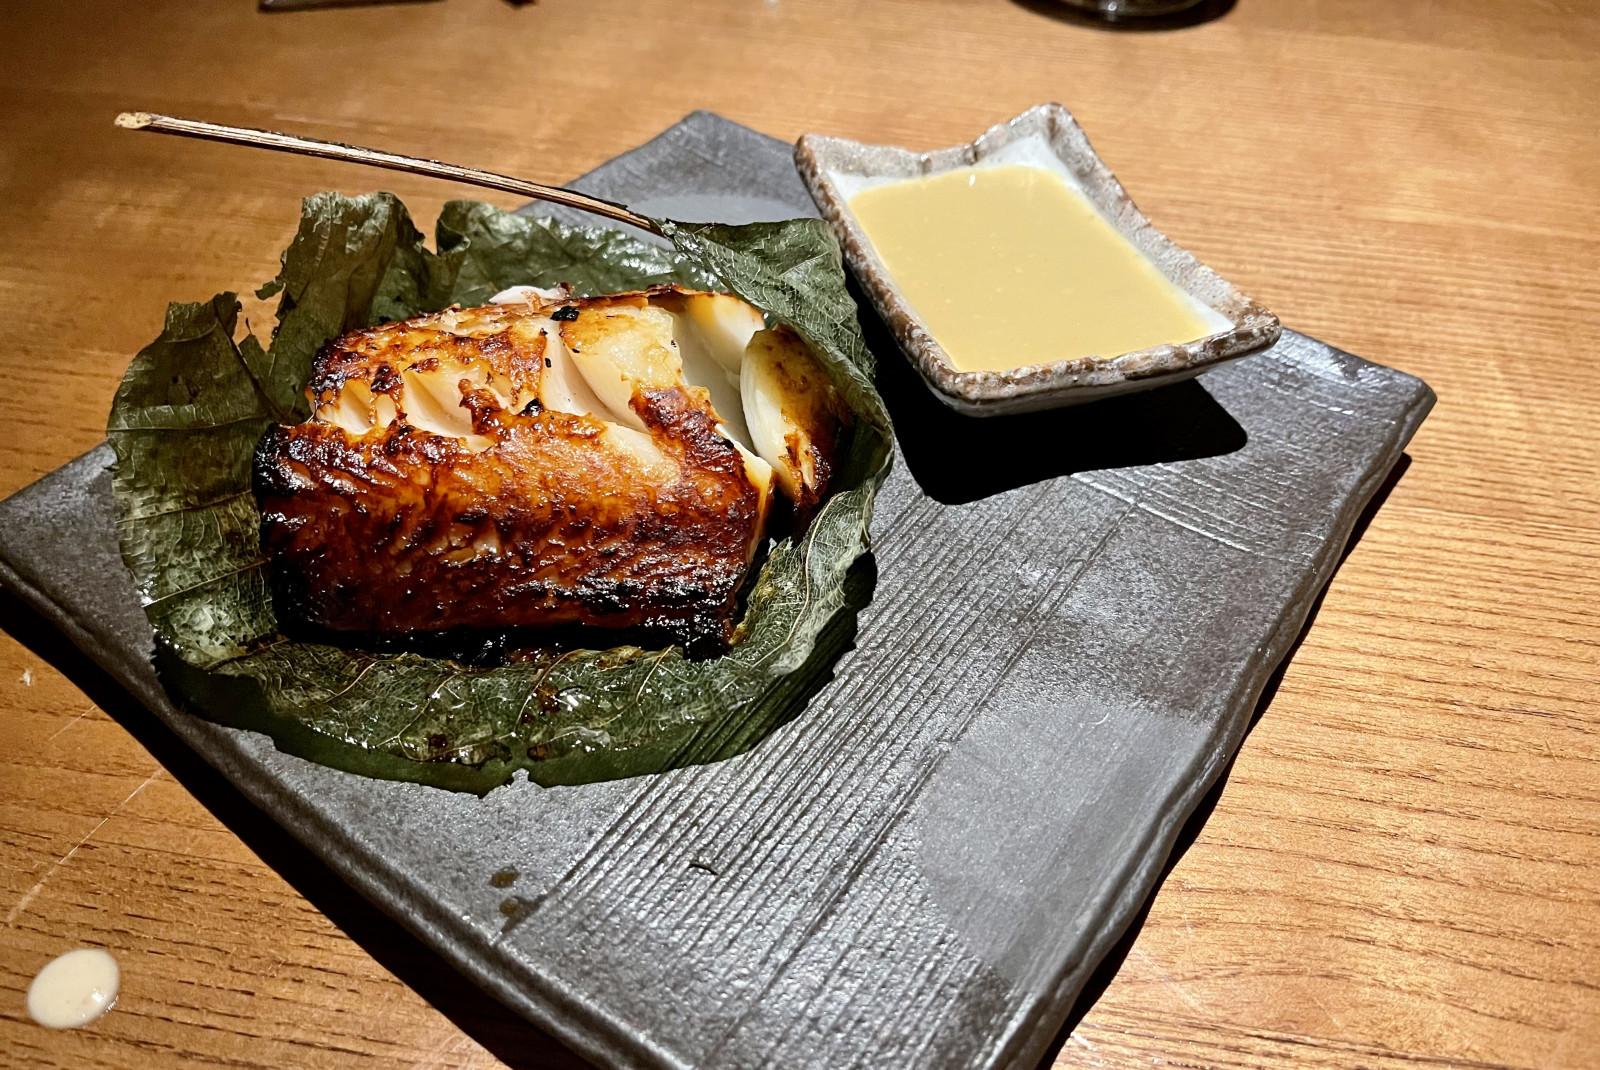 Fish and a saucer filled with sauce on black plate on wooden table